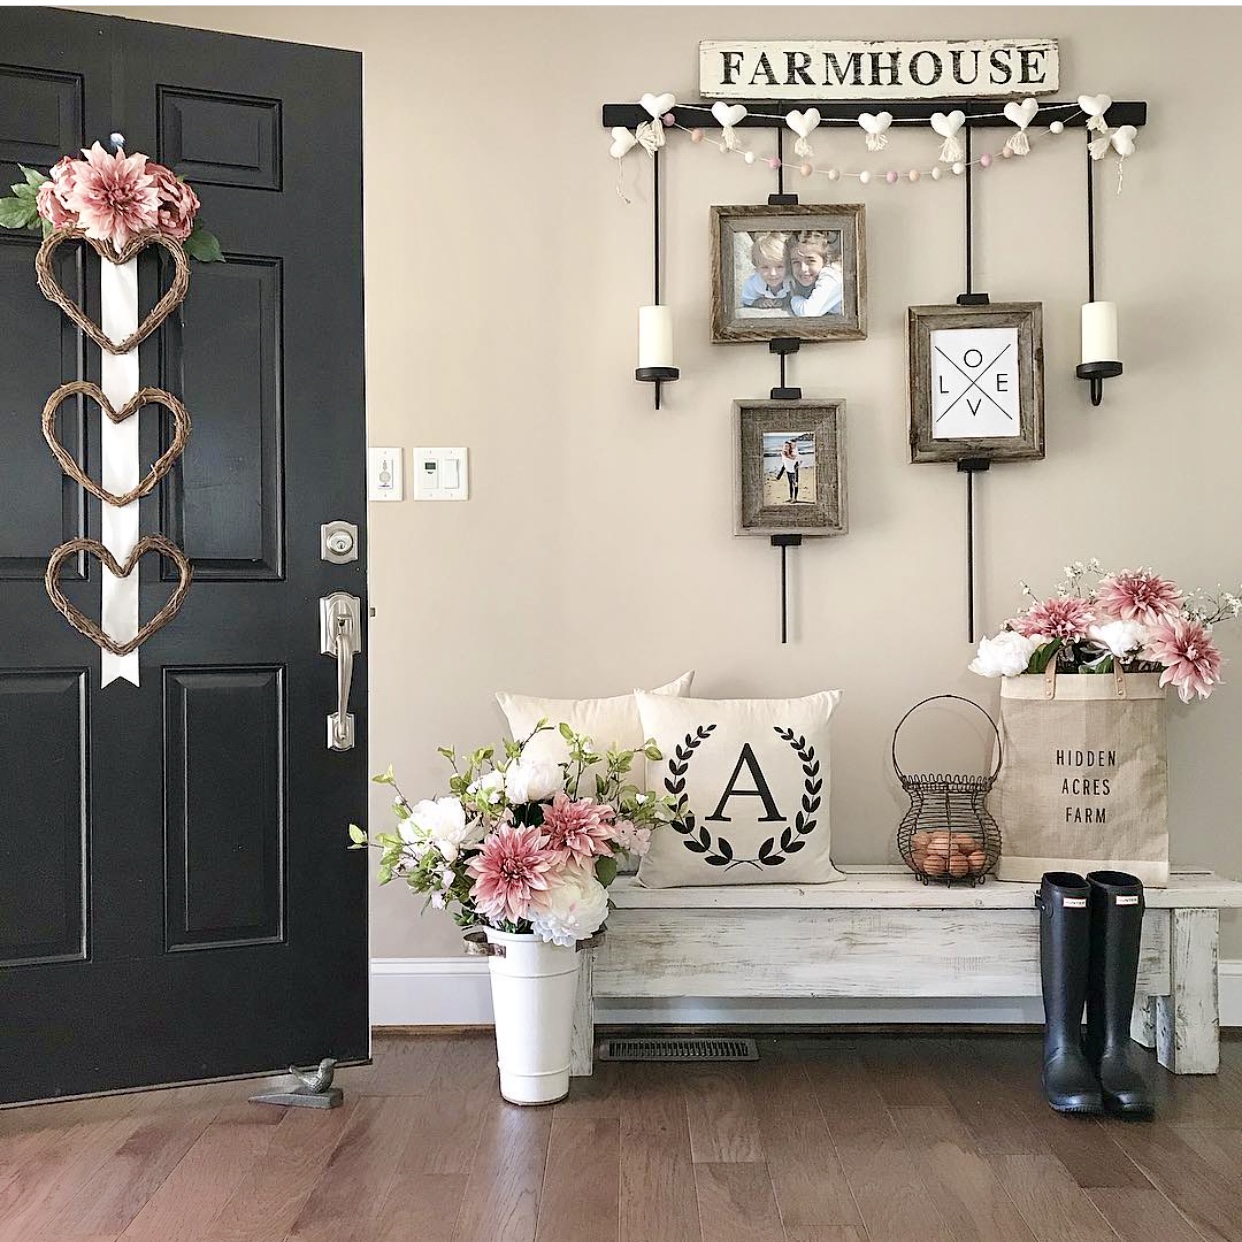 Valentine's Day touches in the farmhouse foyer including pink flowers and a heart door hanger.